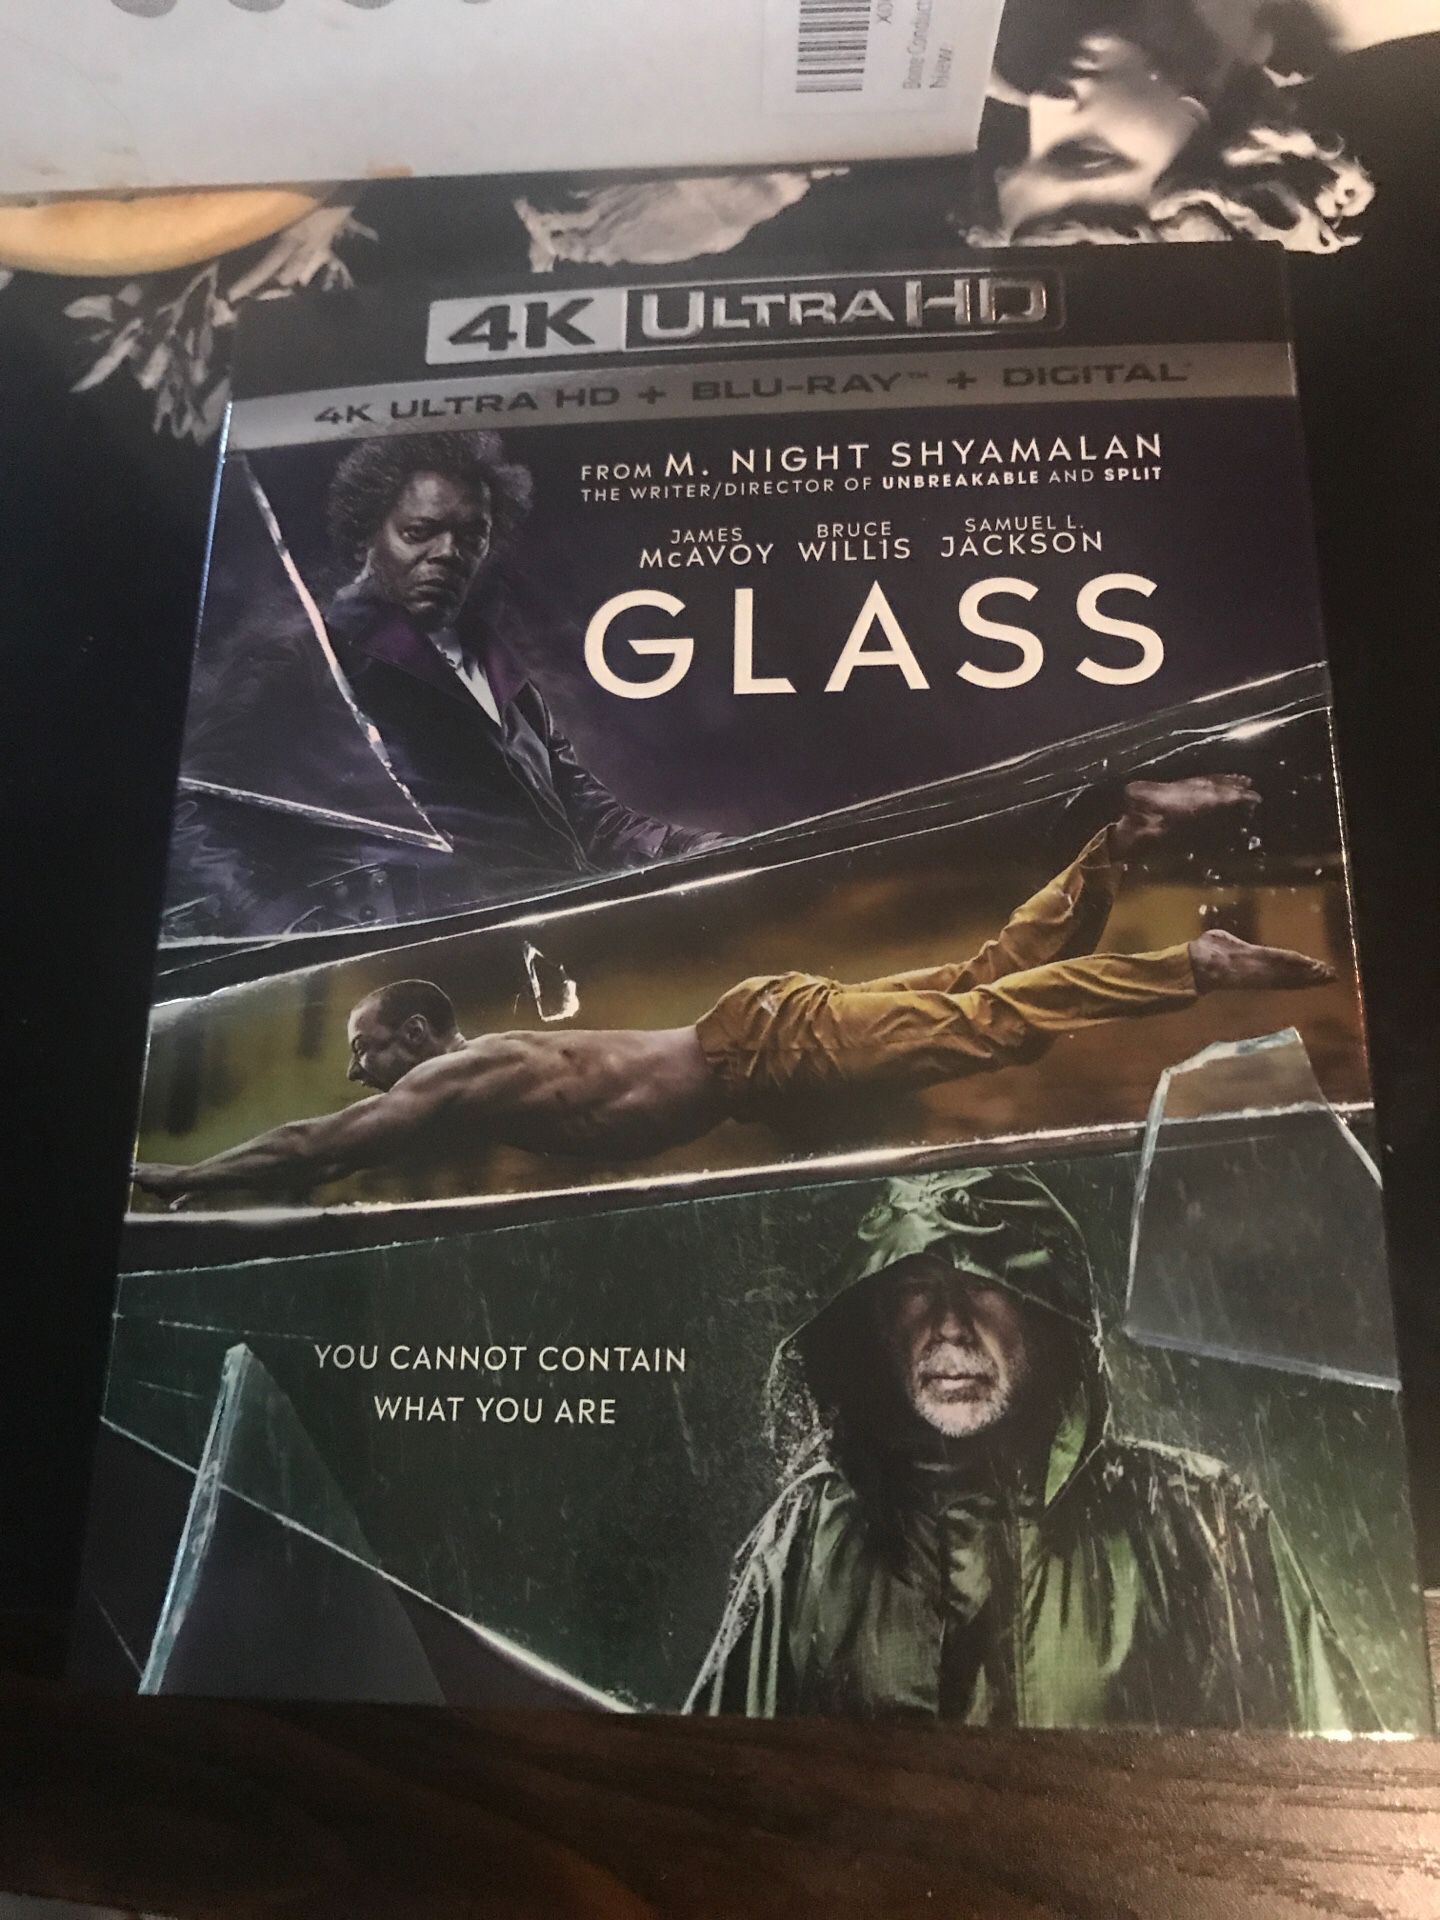 Blue Ray and digital move unopened. $10